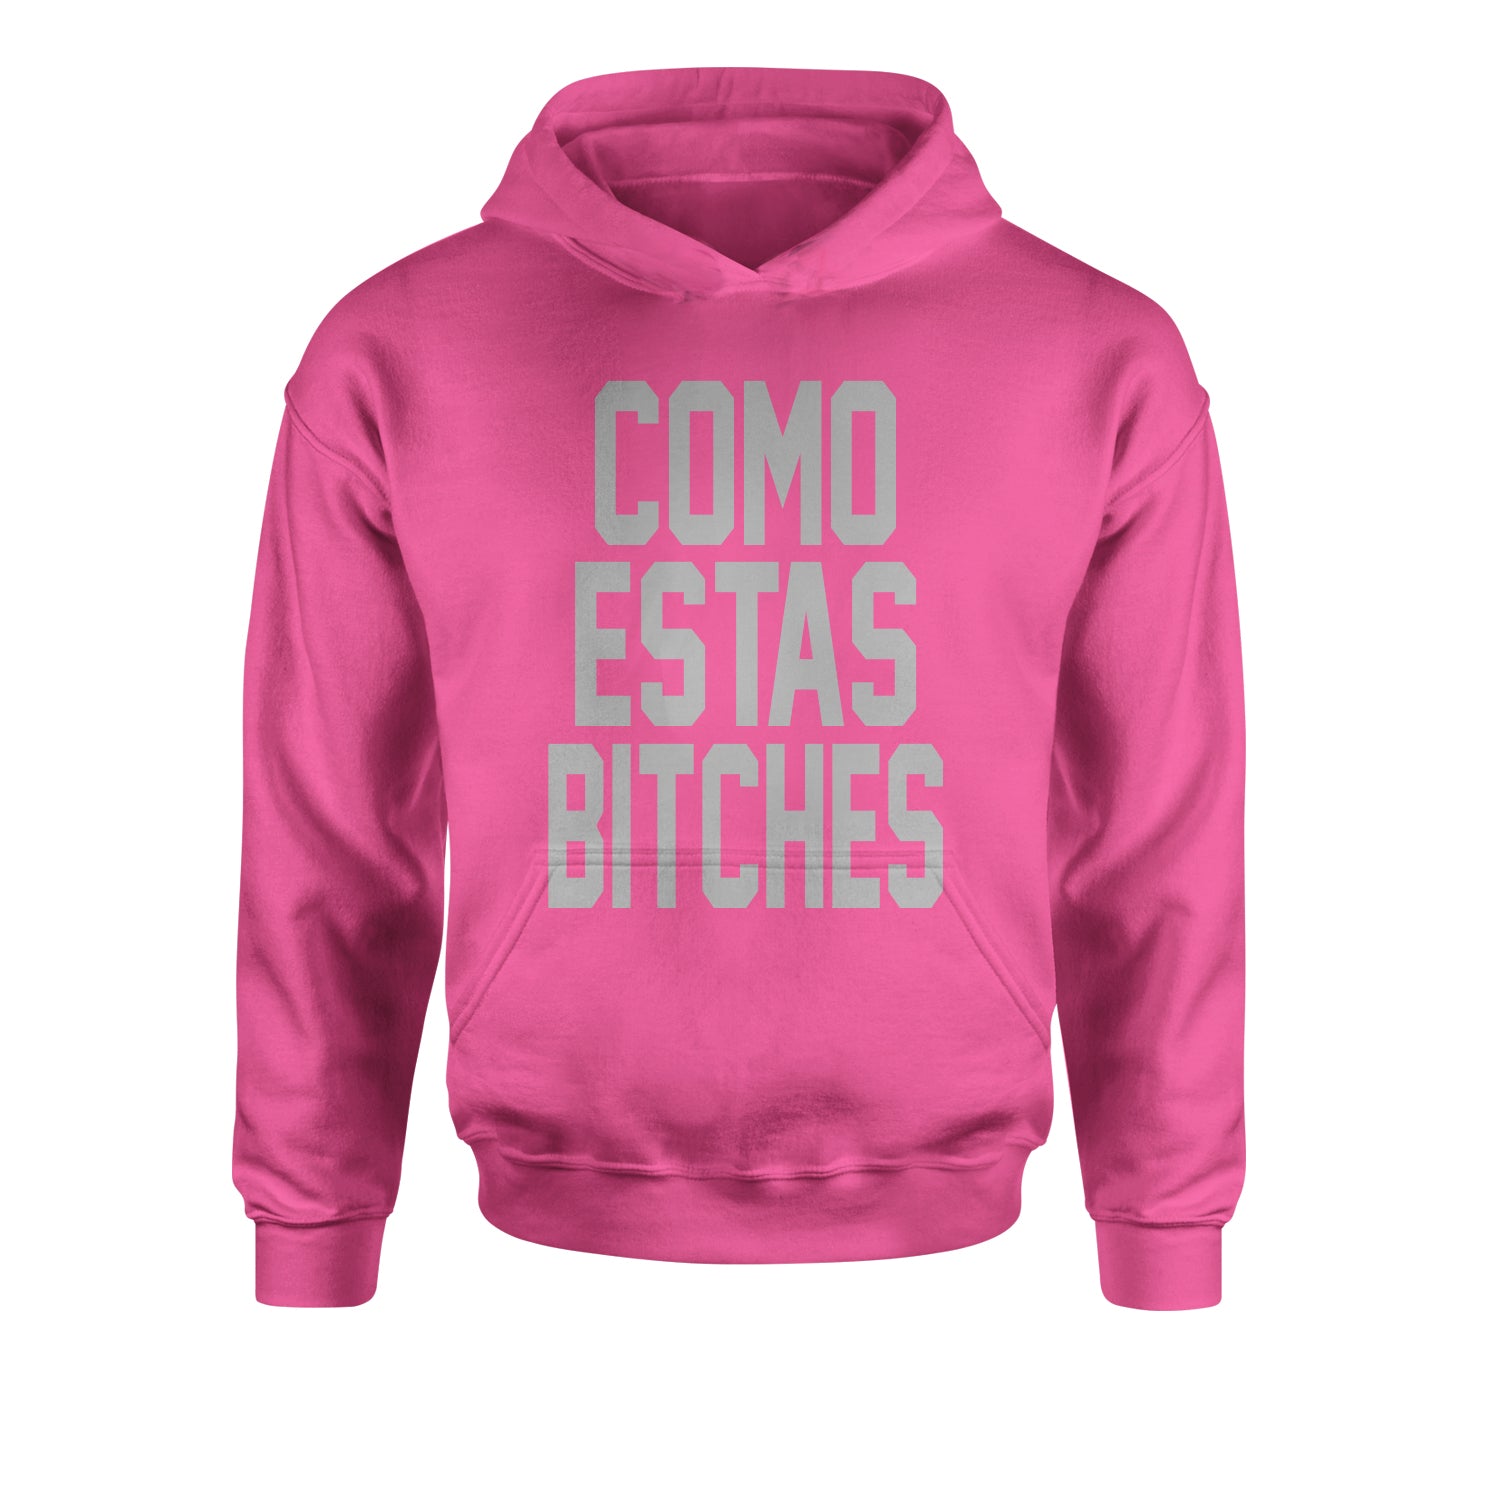 Como Estas B-tches Youth-Sized Hoodie #expressiontees by Expression Tees